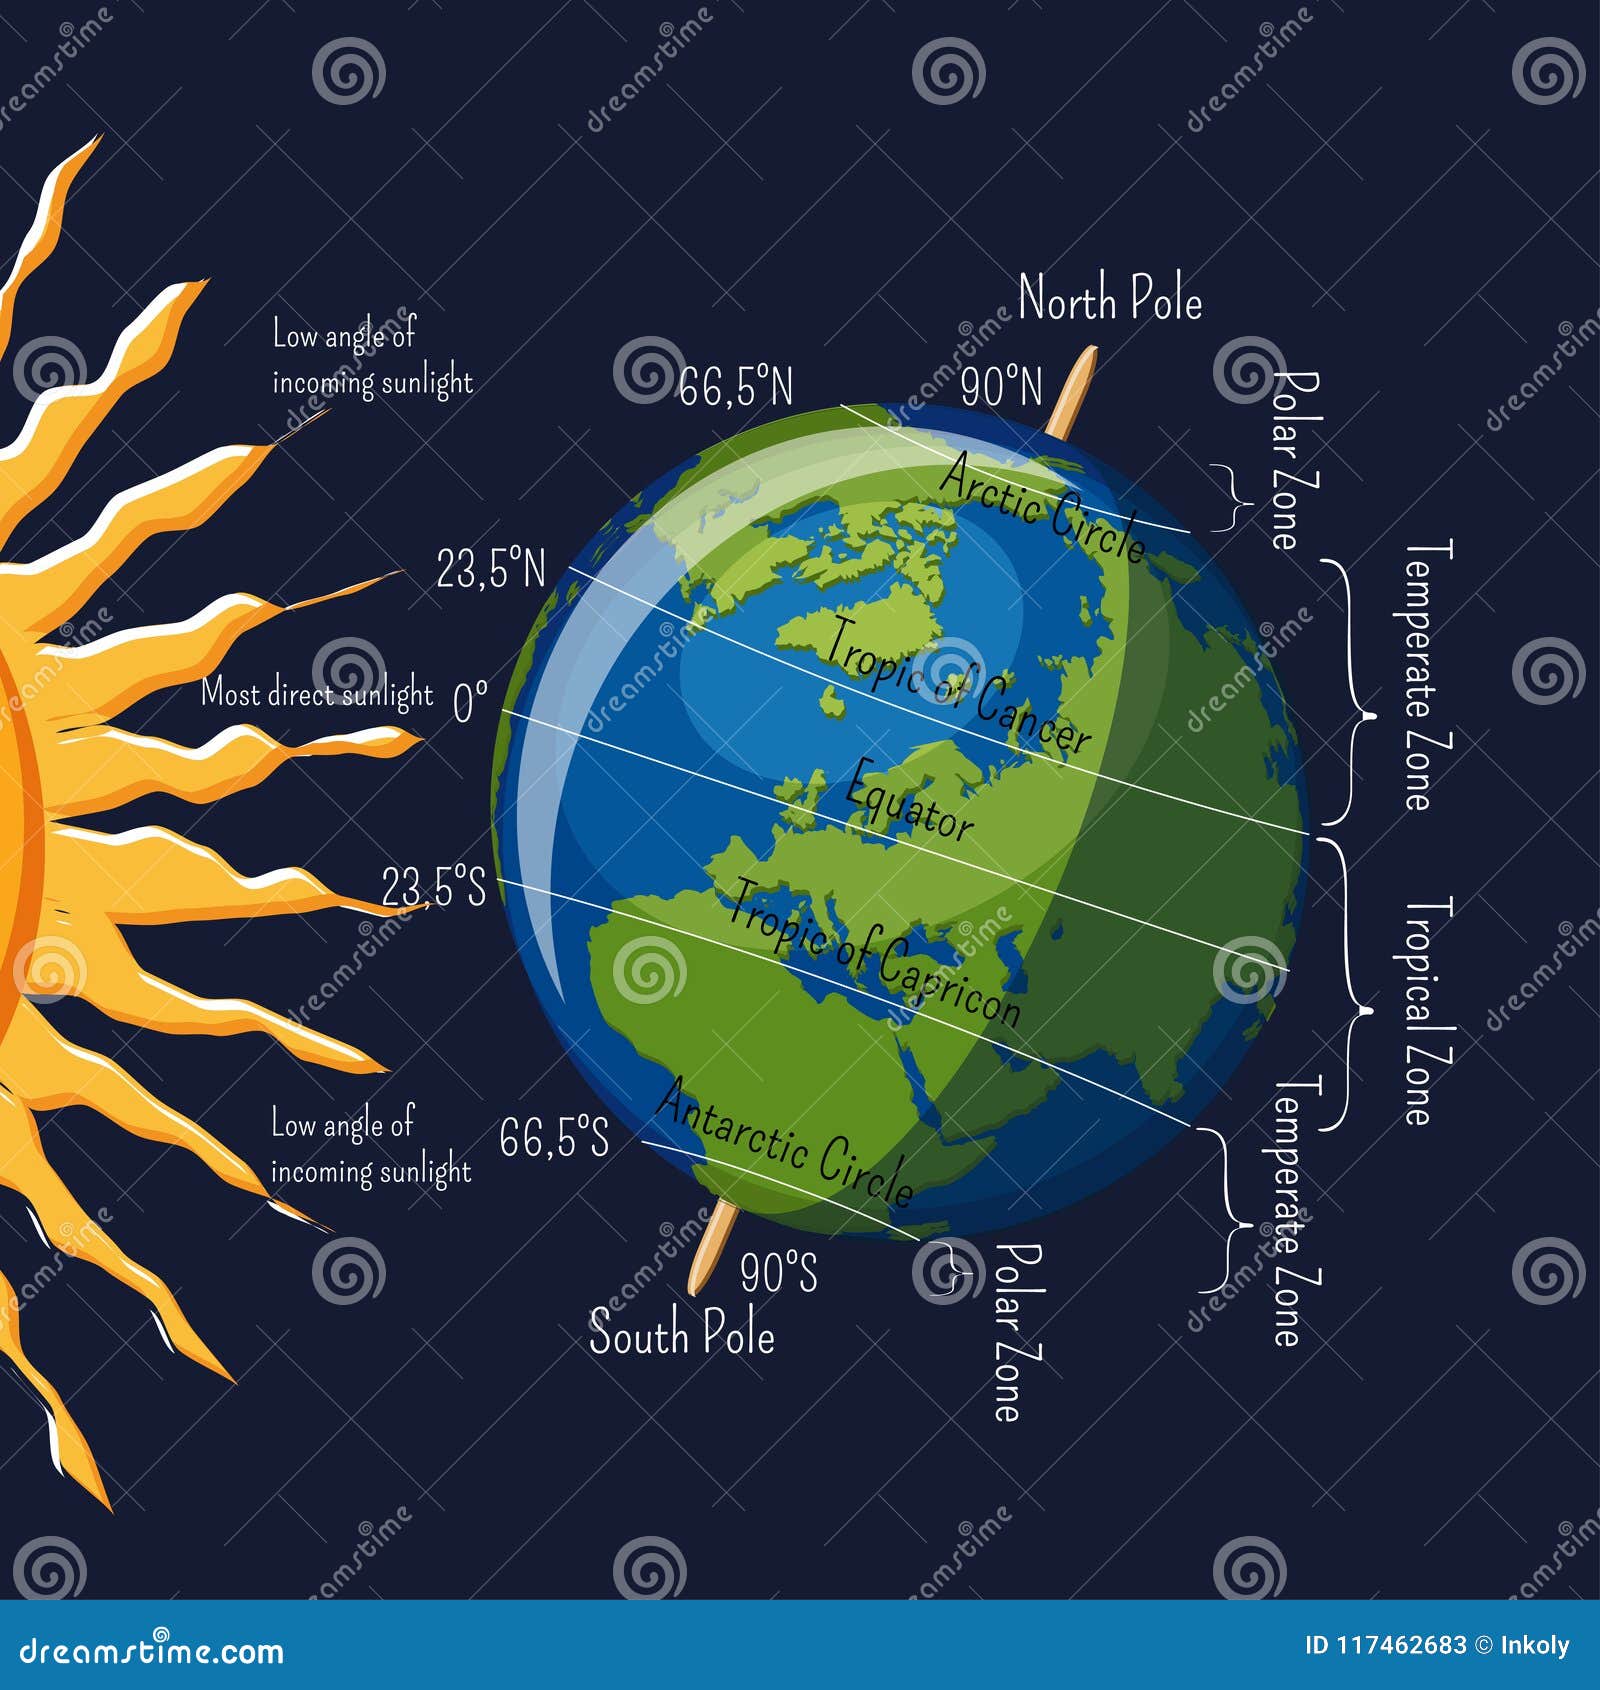 the planet earth climate zones depending on angle of sun rays and major latitudes infographic.